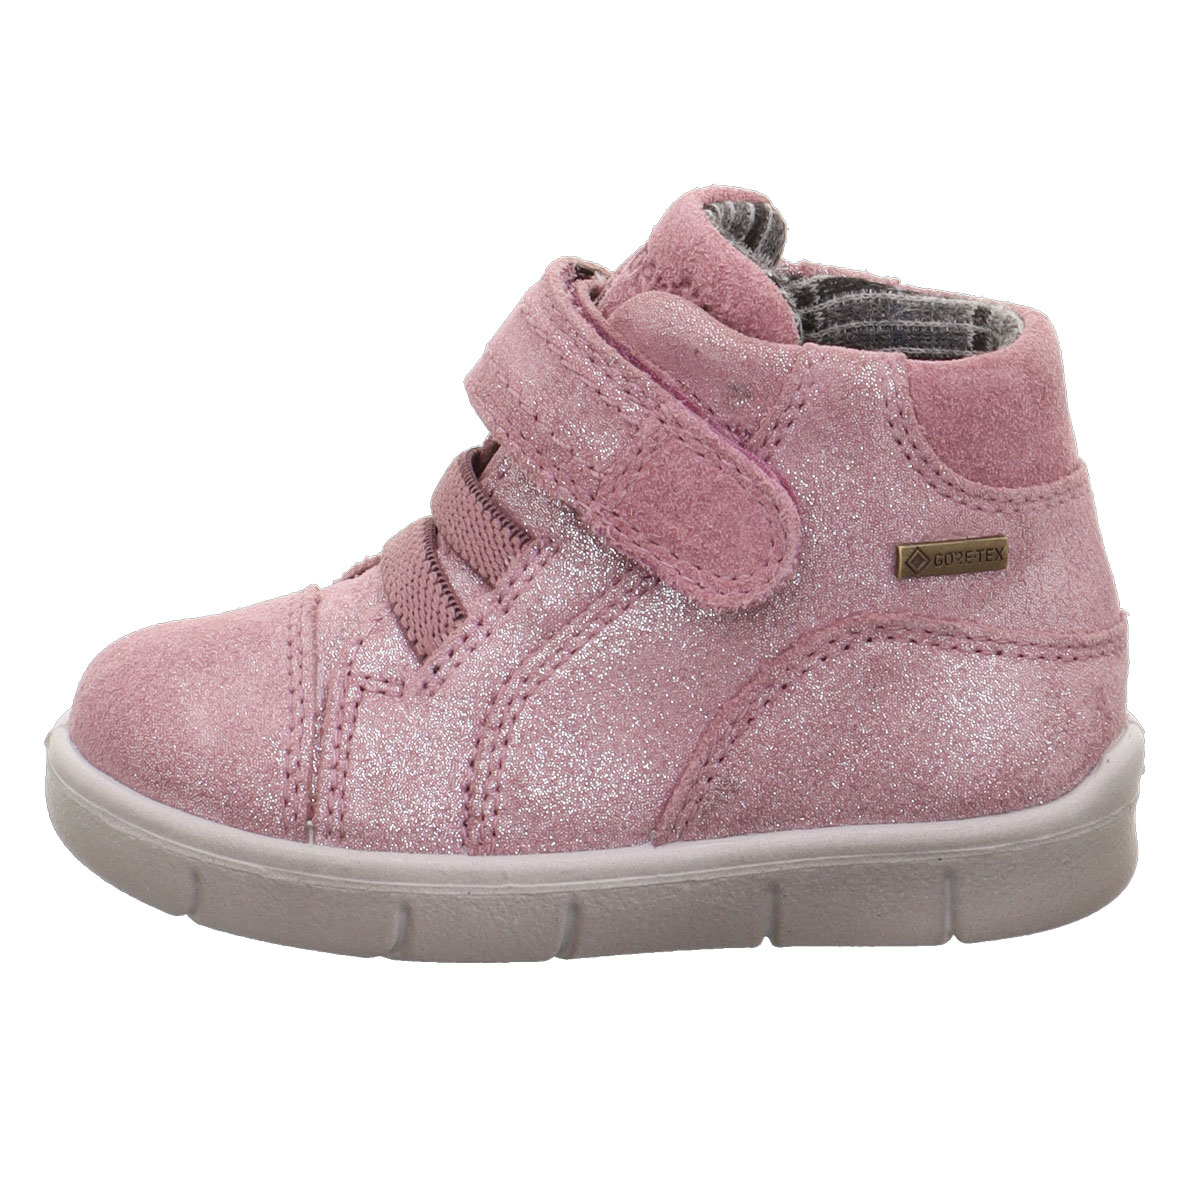 Superfit Ulli Bungee Gtx Pink Glitter Kids Toddler Girls Boots 1009429-8510 in a Plain Leather in Size 24